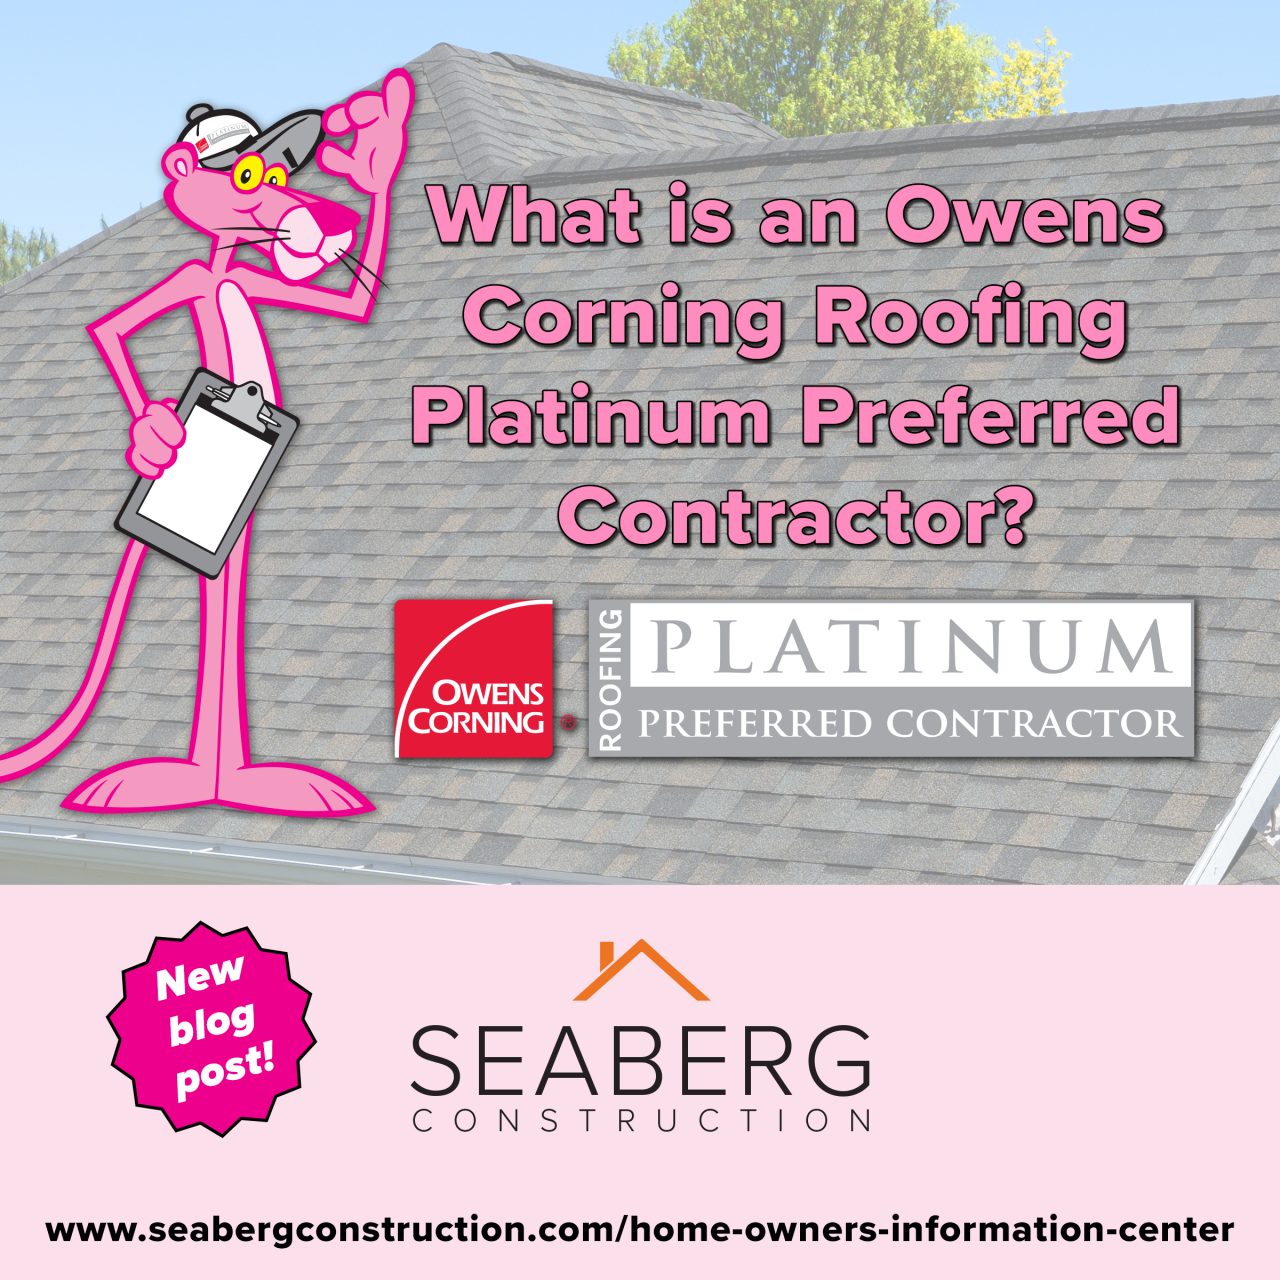 Owens Corning Roofing Platinum Preferred Contractor, pink panther, roofing ri, quality roofing ri, warranty, roof contractor, roof replacement, rhode island roofing